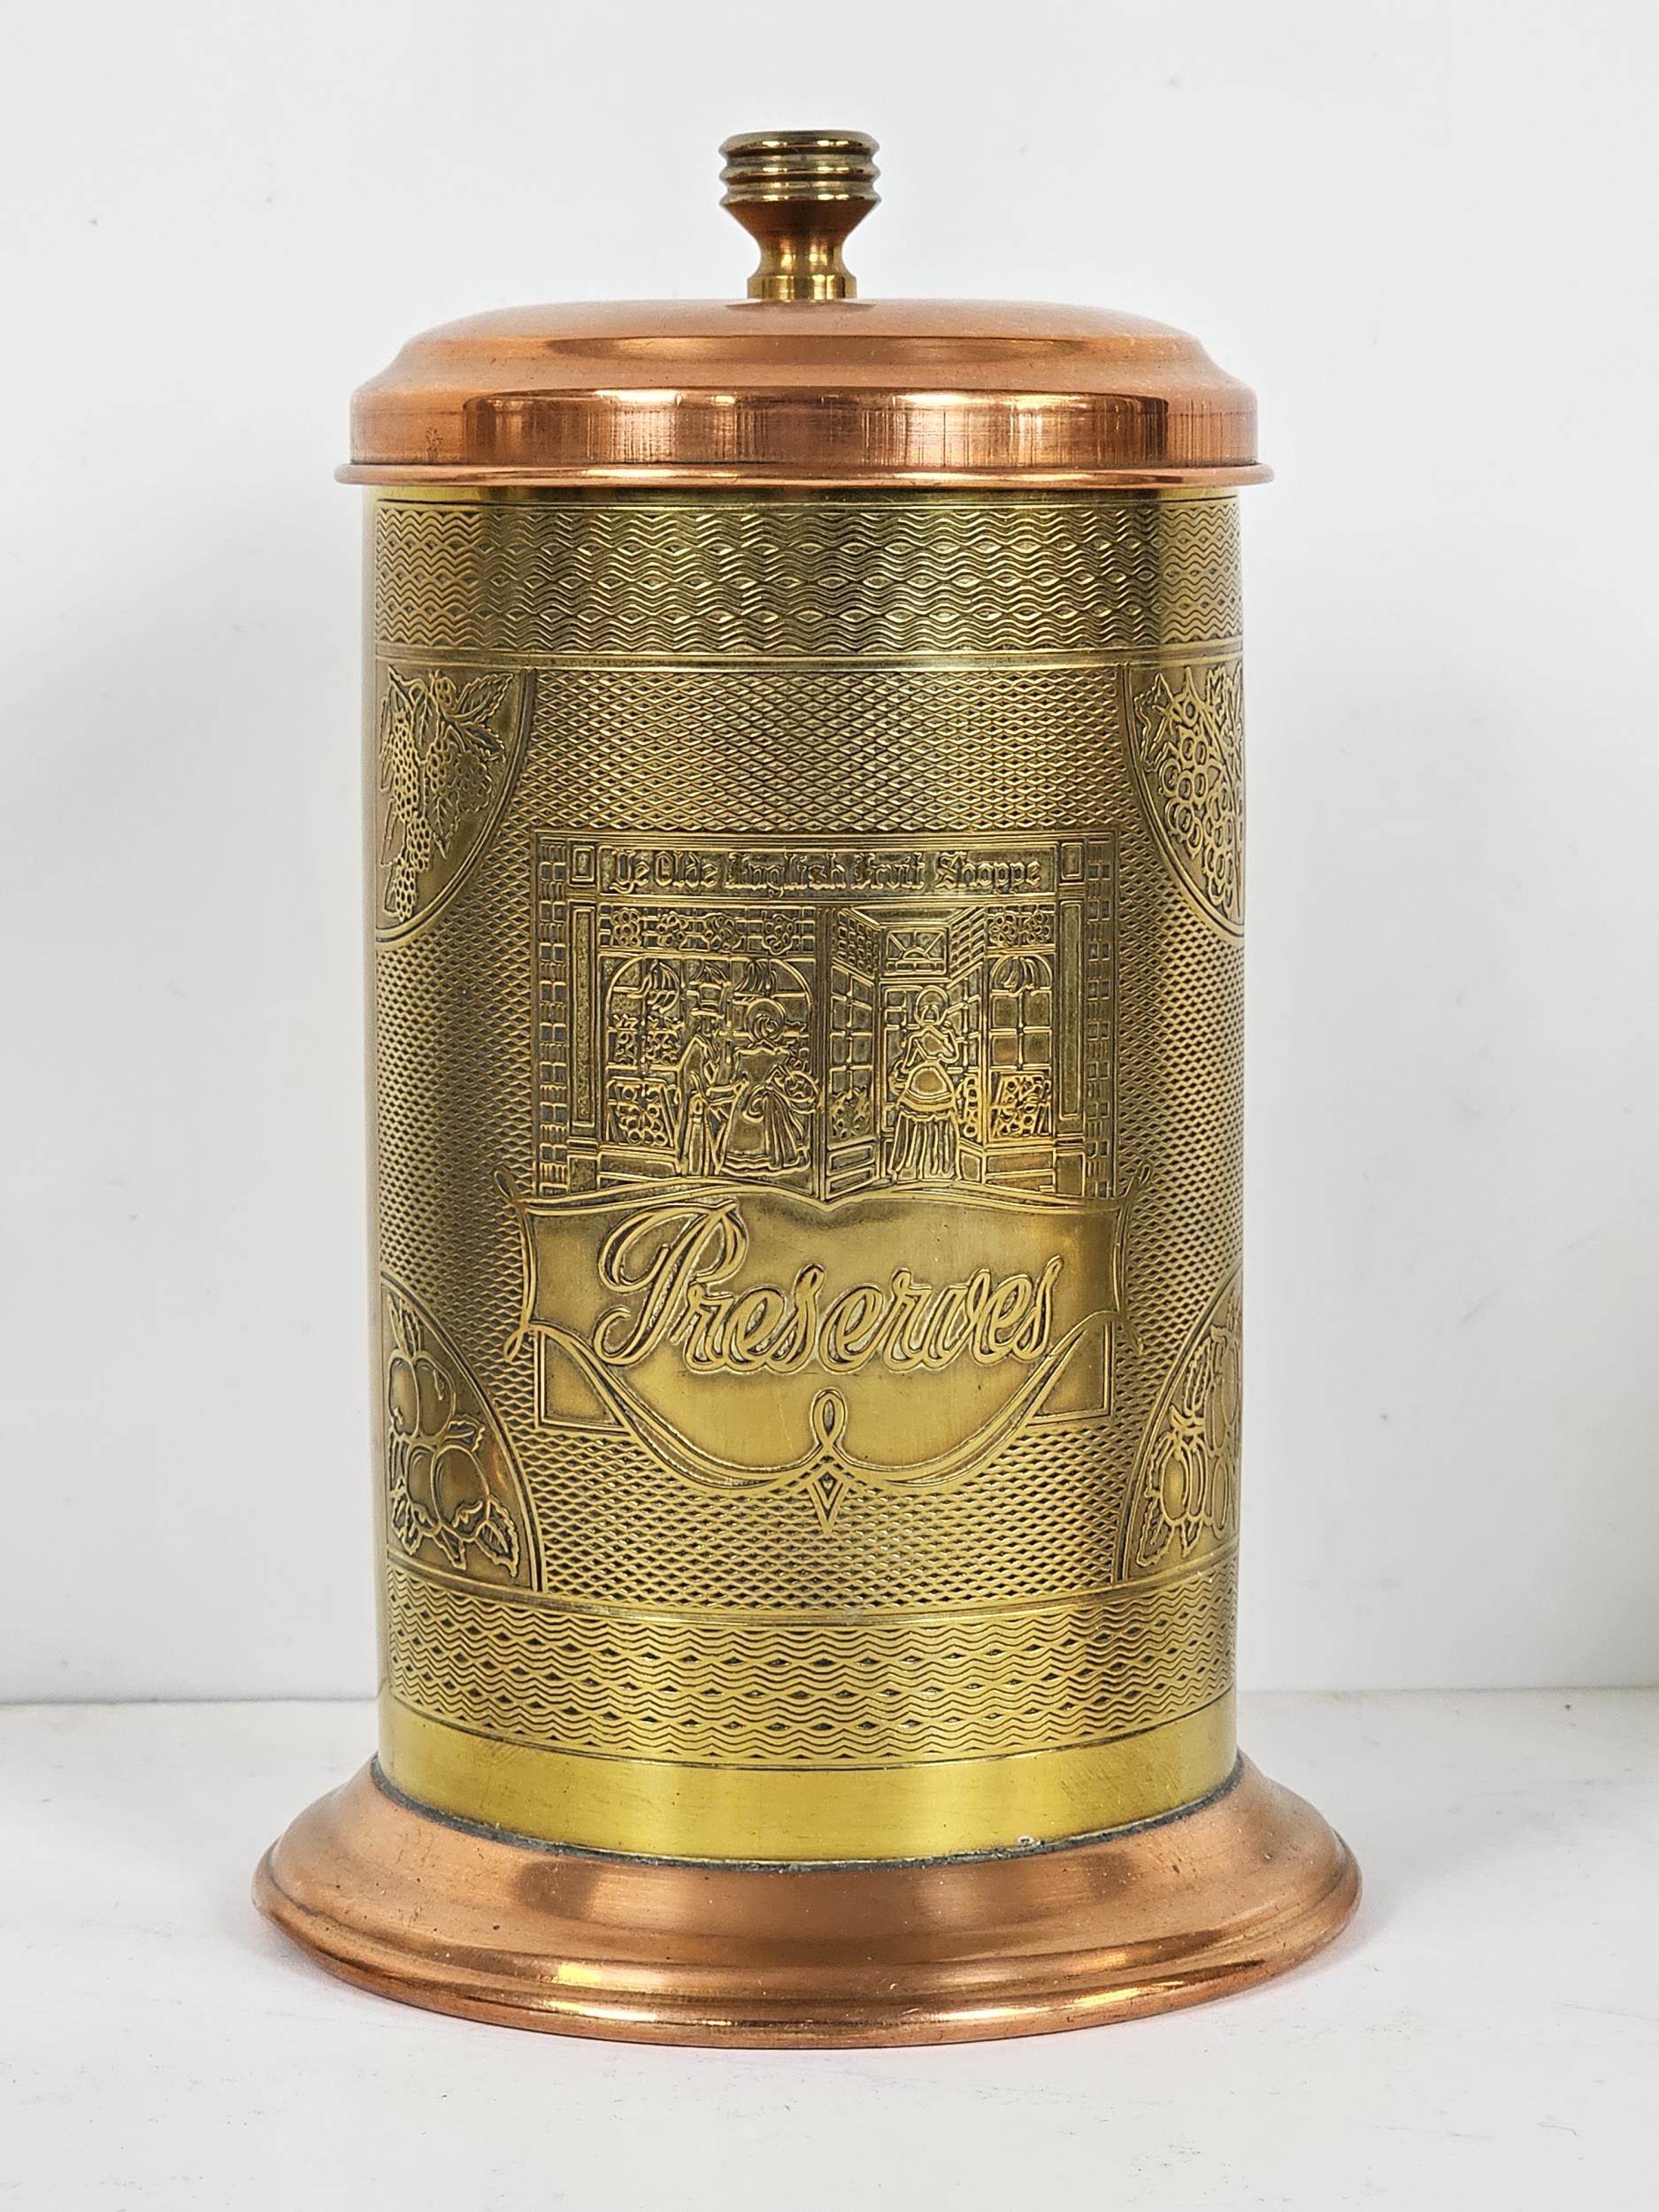 A quantity of commemorative brass and copper tea caddys and caddy spoons - Image 8 of 11